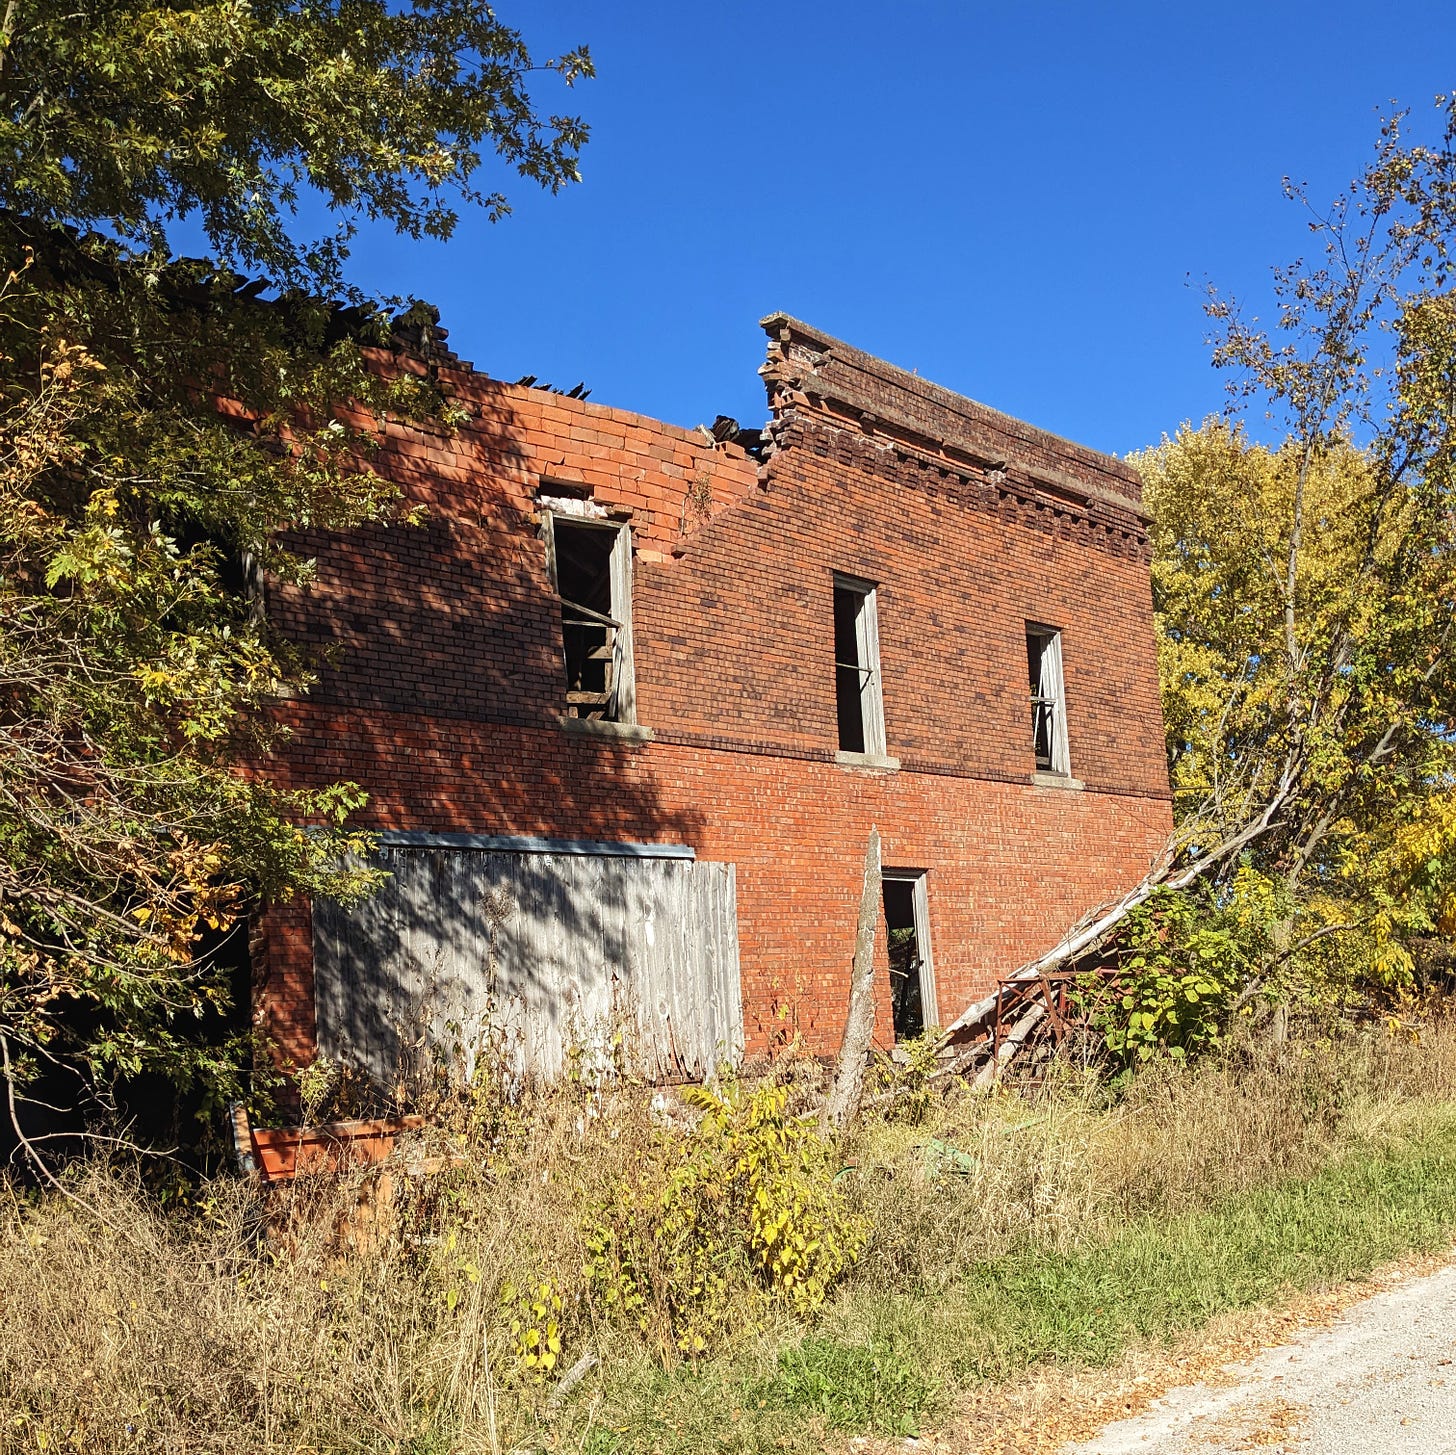 An abandoned brick building missing its roof and windows, surrounded by trees